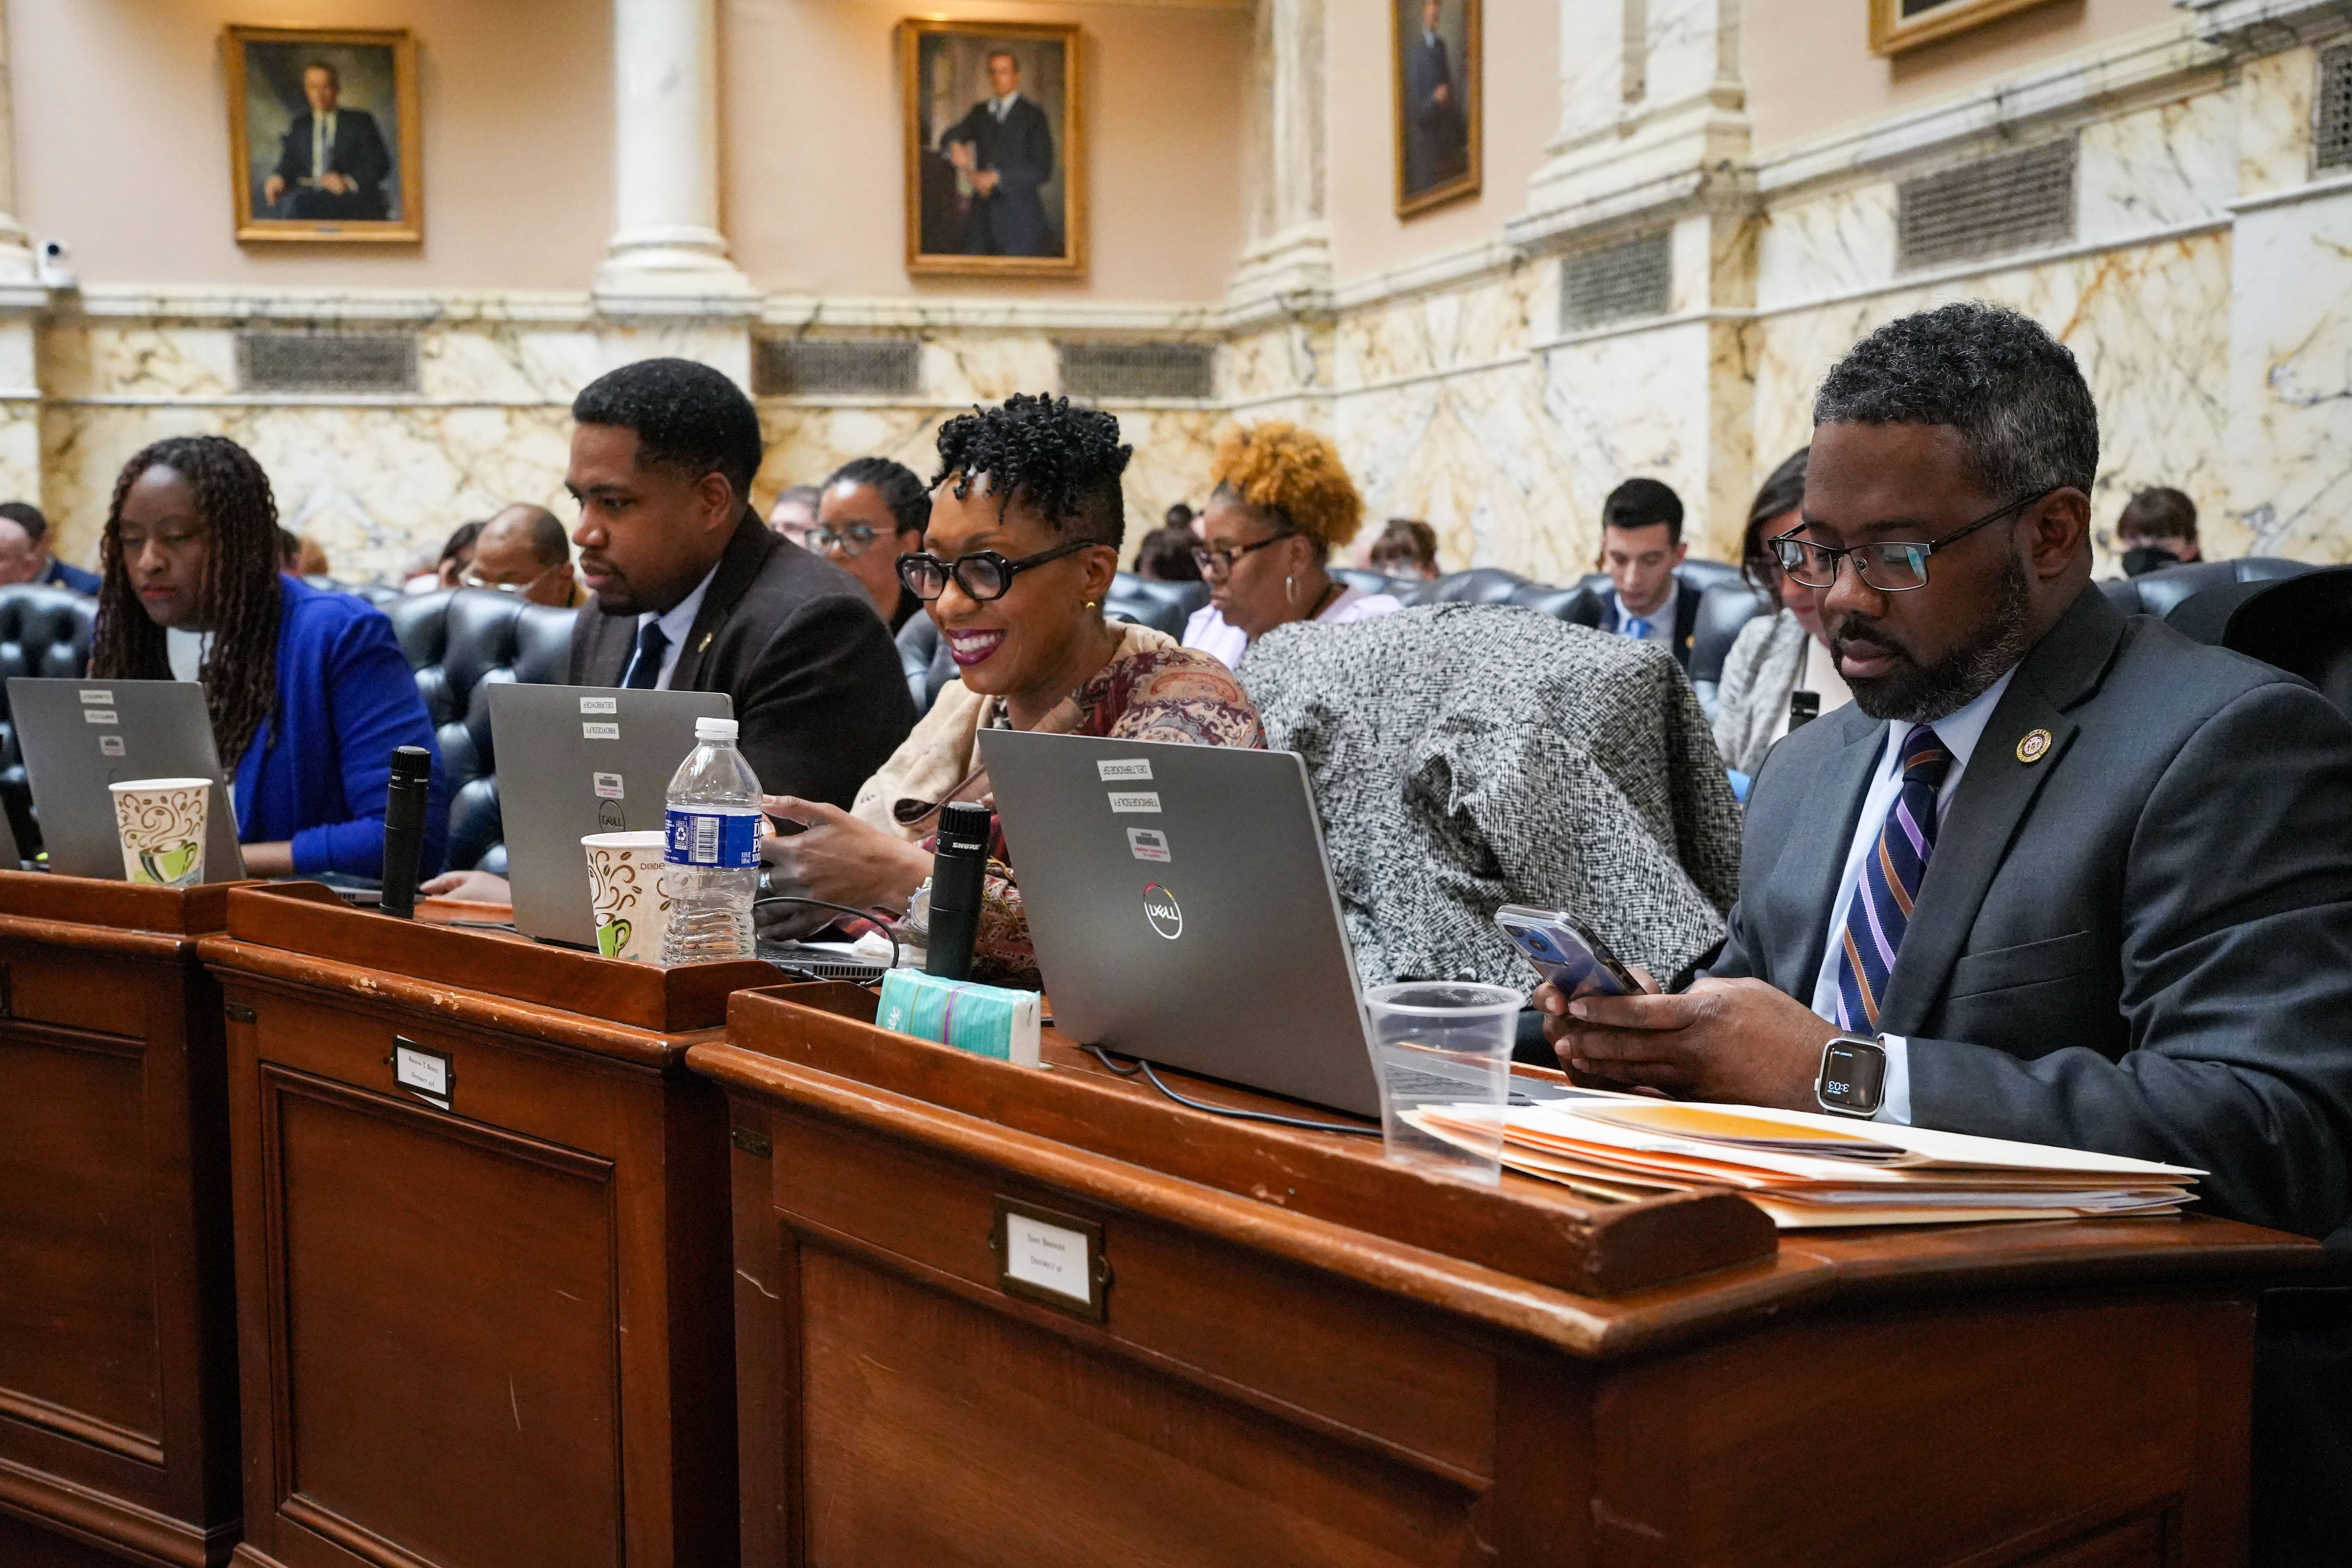 From left: Del. Stephanie Smith, Del. Marlon Amprey, Del. Regina Boyce and Del. Tony Bridges, all representing Baltimore City, listen to floor debate at the Maryland State House on Monday, March 20, also known as Crossover Day in Annapolis. General Assembly session rules require bills to pass one chamber — either the House of Delegates or the state Senate — by the end of the day on Monday, to ensure the other chamber will consider it.